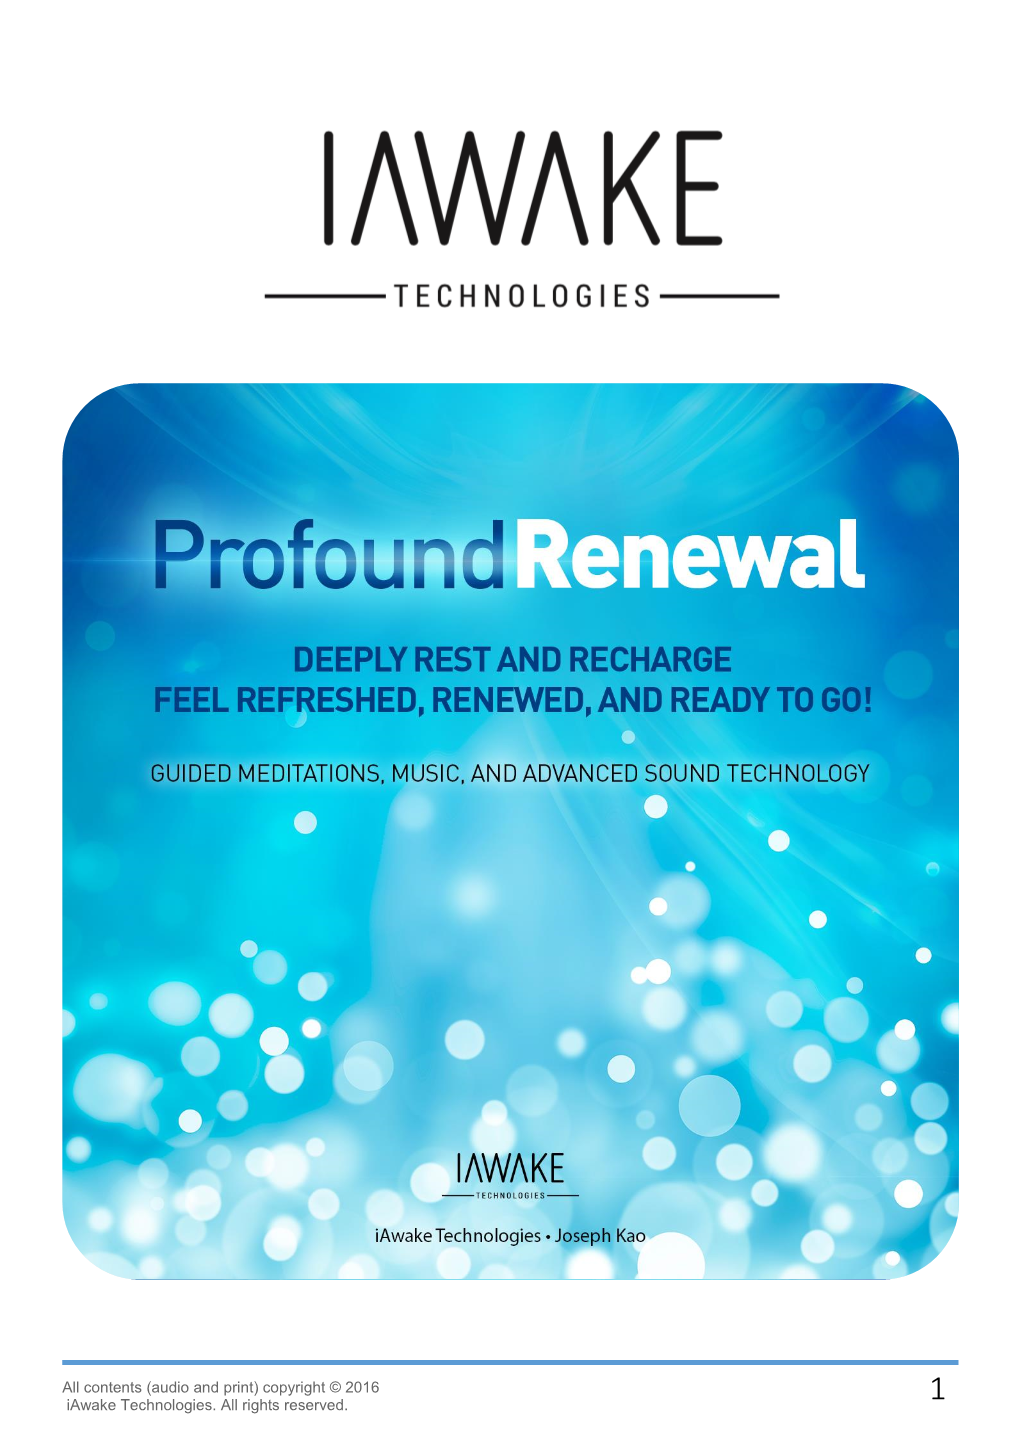 Profound Renewal Agrees That This Audio Program Is Designed Solely for Meditation, Self-Improvement, Learning, Aid in Motivation, Relaxation, and Experimentation